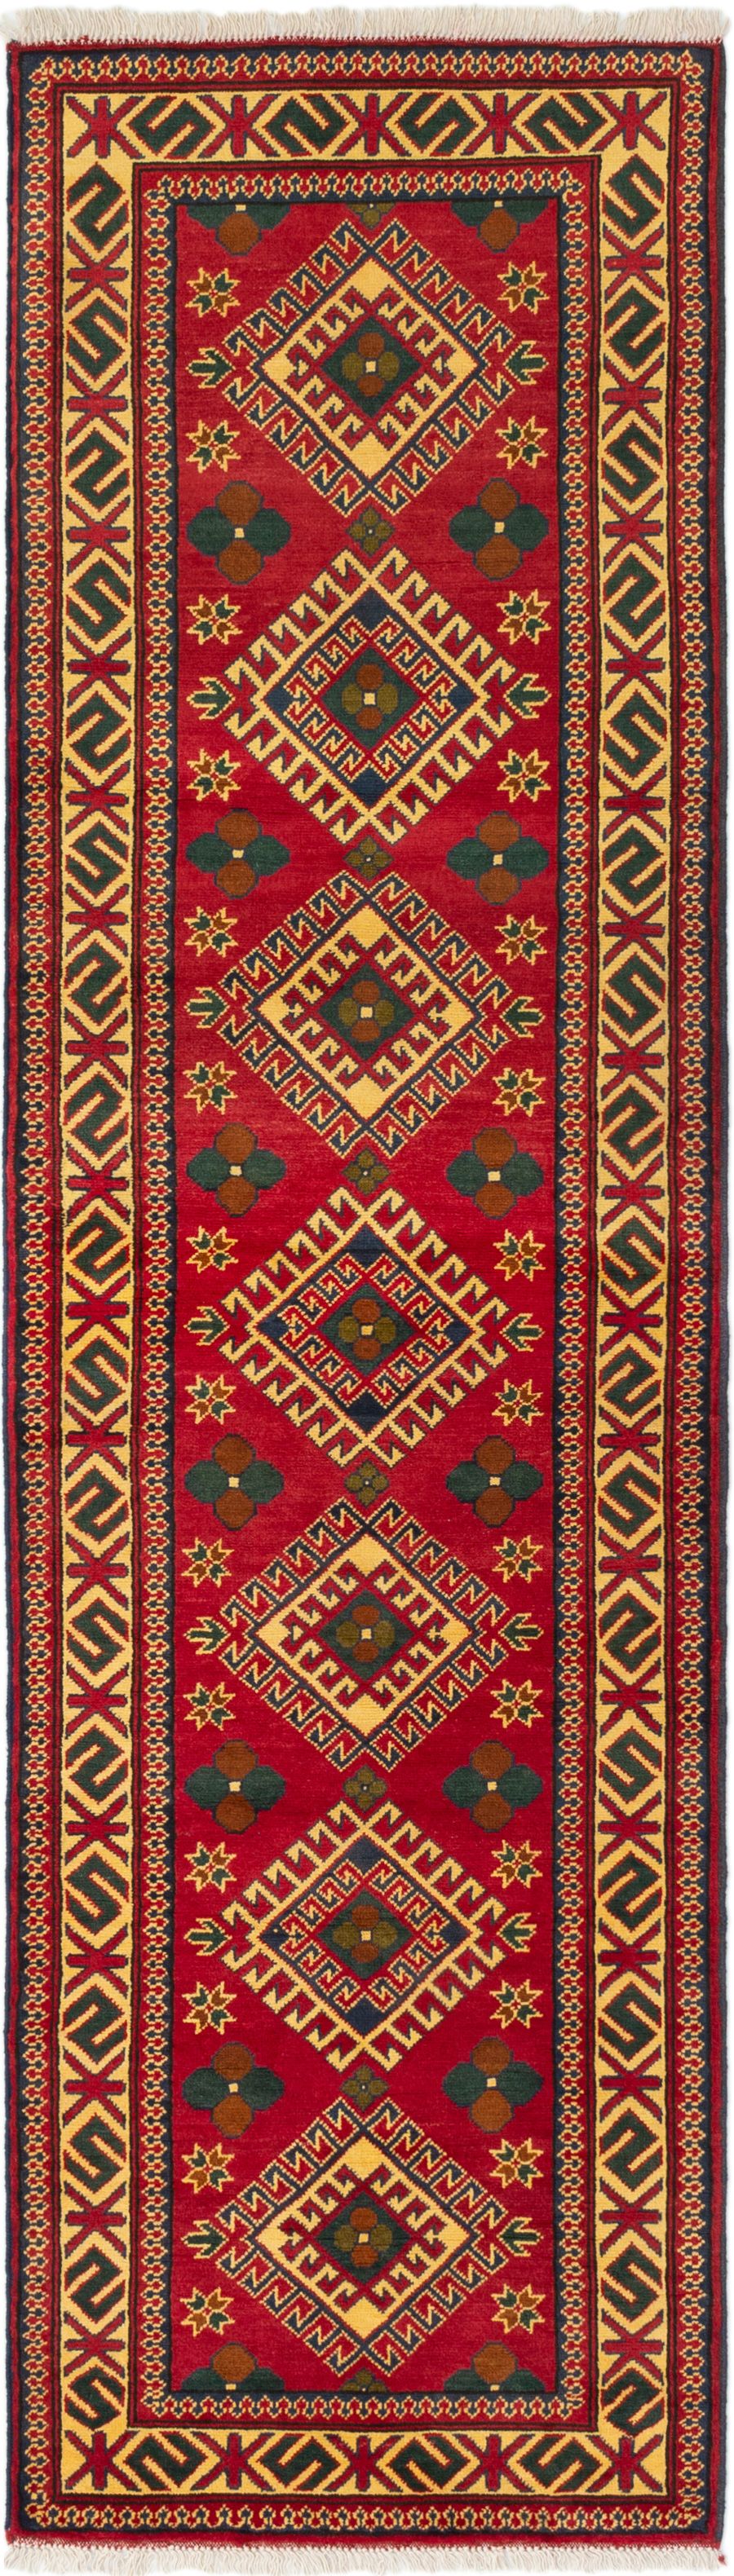 Hand-knotted Finest Kargahi Red Wool Rug 2'8" x 9'7" Size: 2'8" x 9'7"  